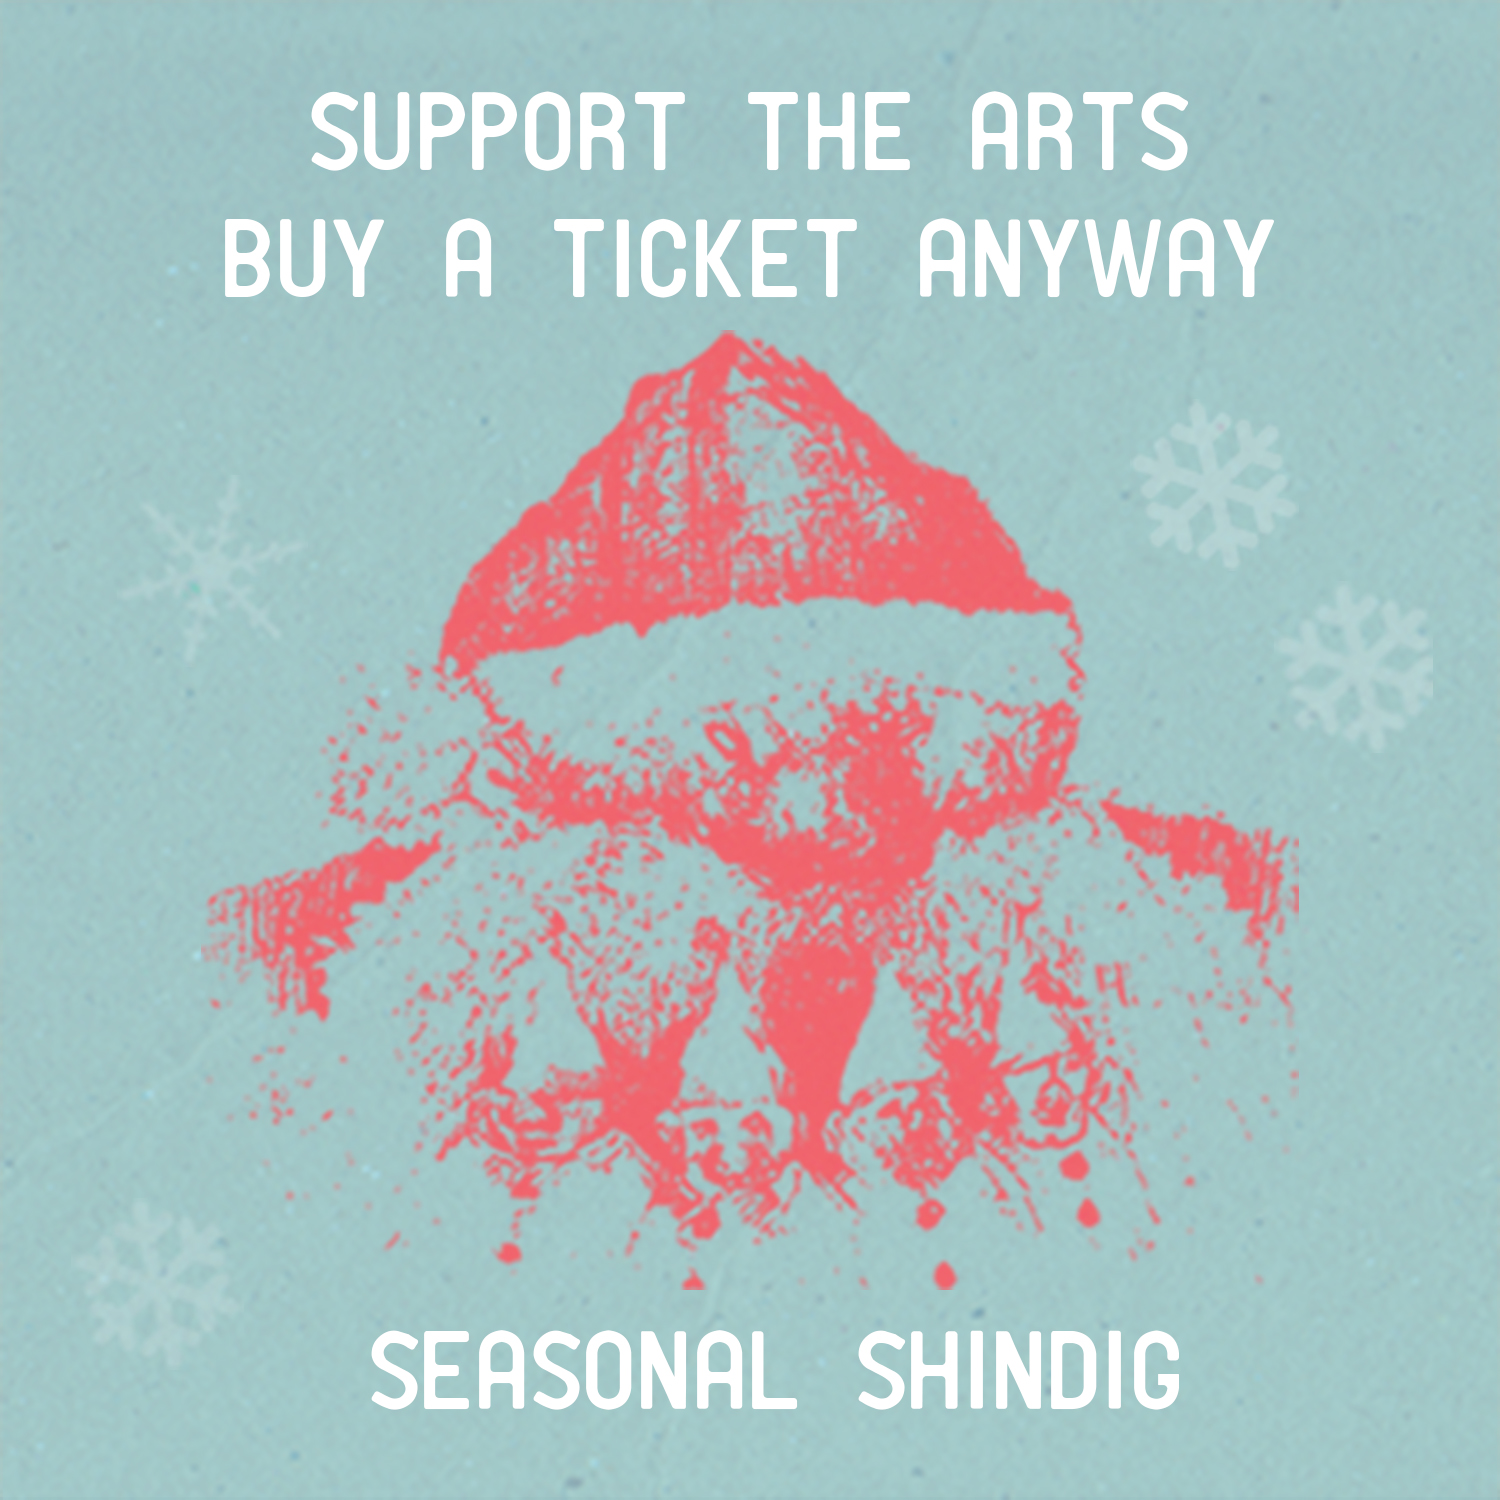 SUPPORT THE ARTS BUY AT TICKET